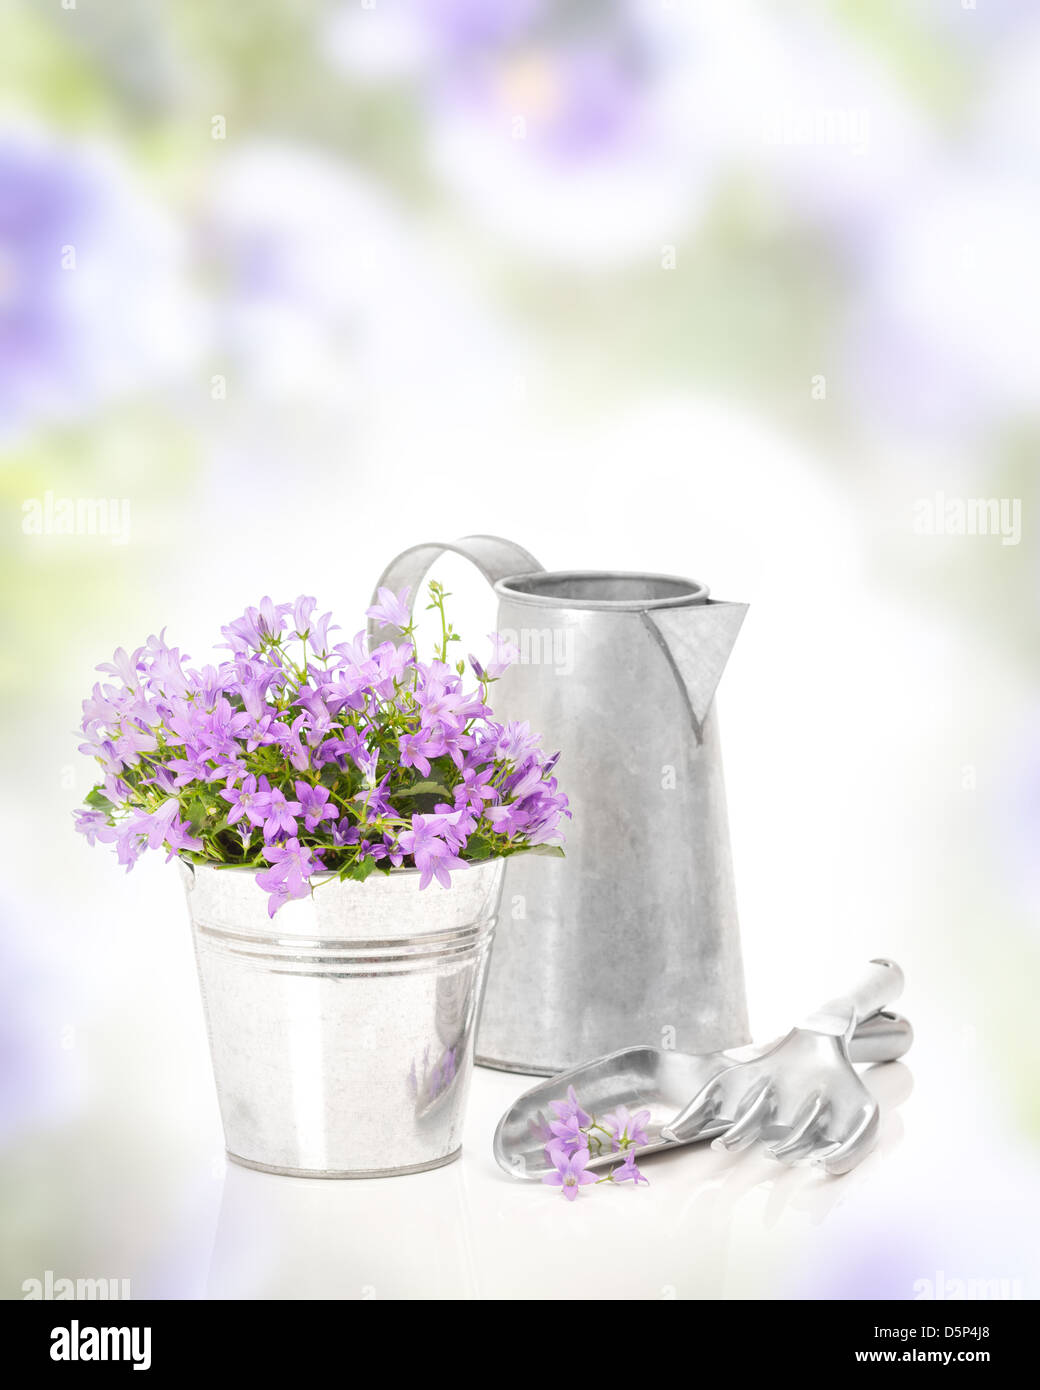 Pretty Companula flowers in bucket with watering jug Stock Photo